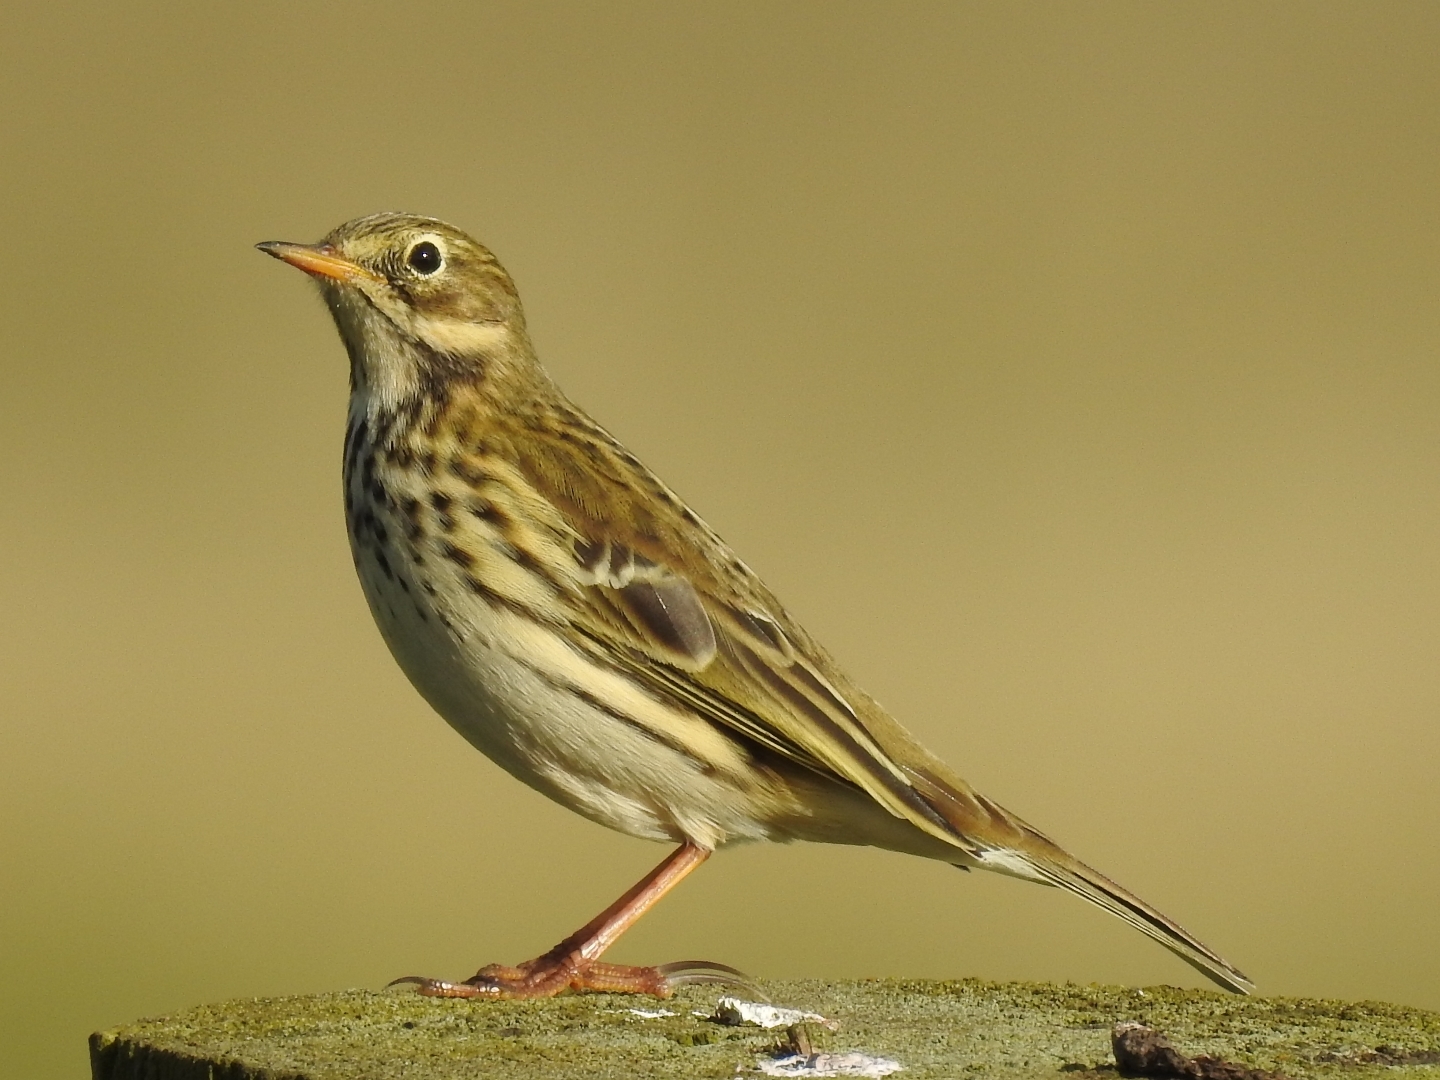 LBJ: The meadow pipit is one of nature’s so-called ‘little brown jobs’, which can lead to a deal of head-scratching among birdwatchers